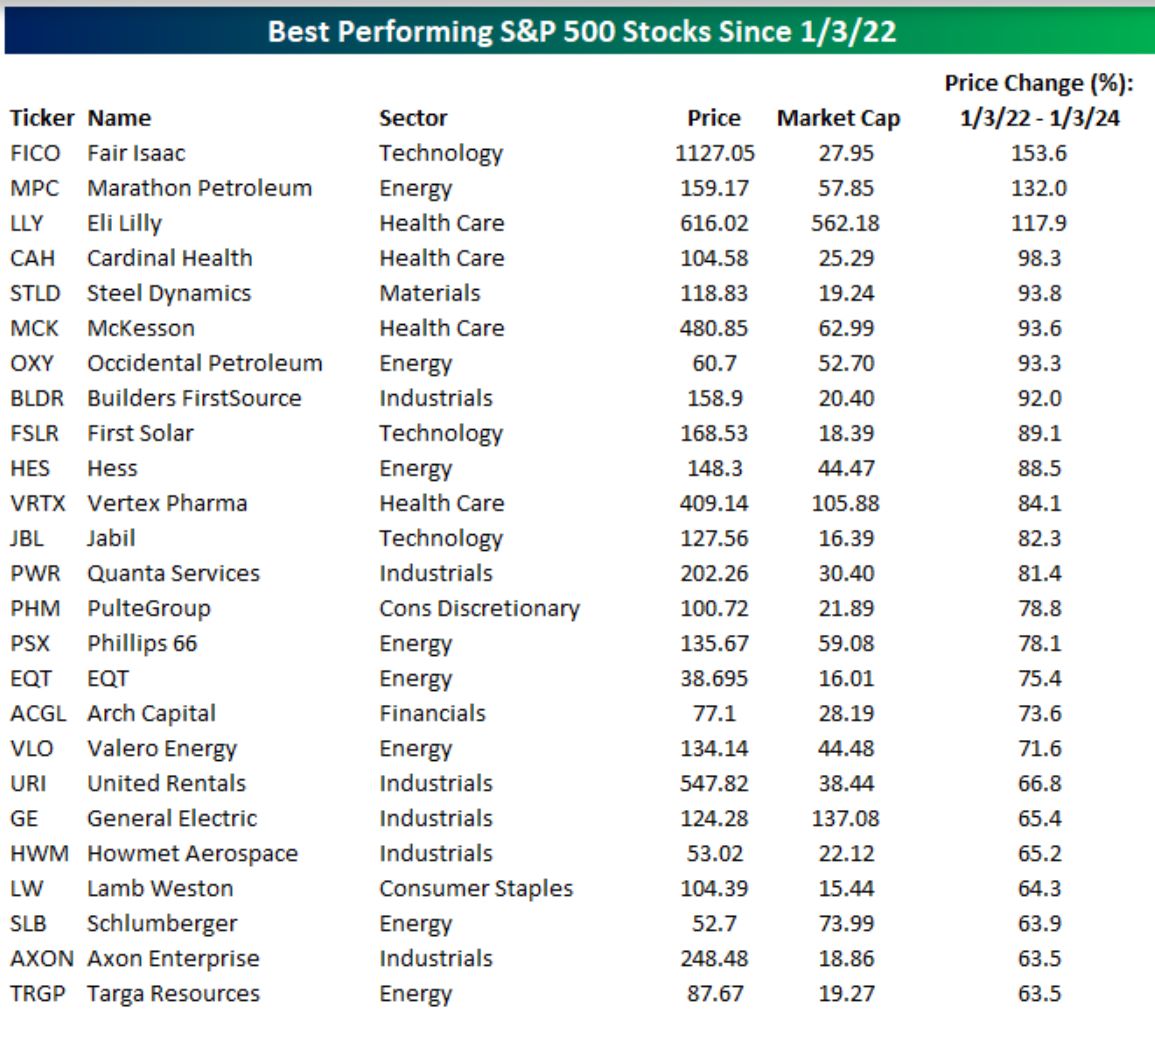 Best performing S&P 500 stocks since 1-3-22